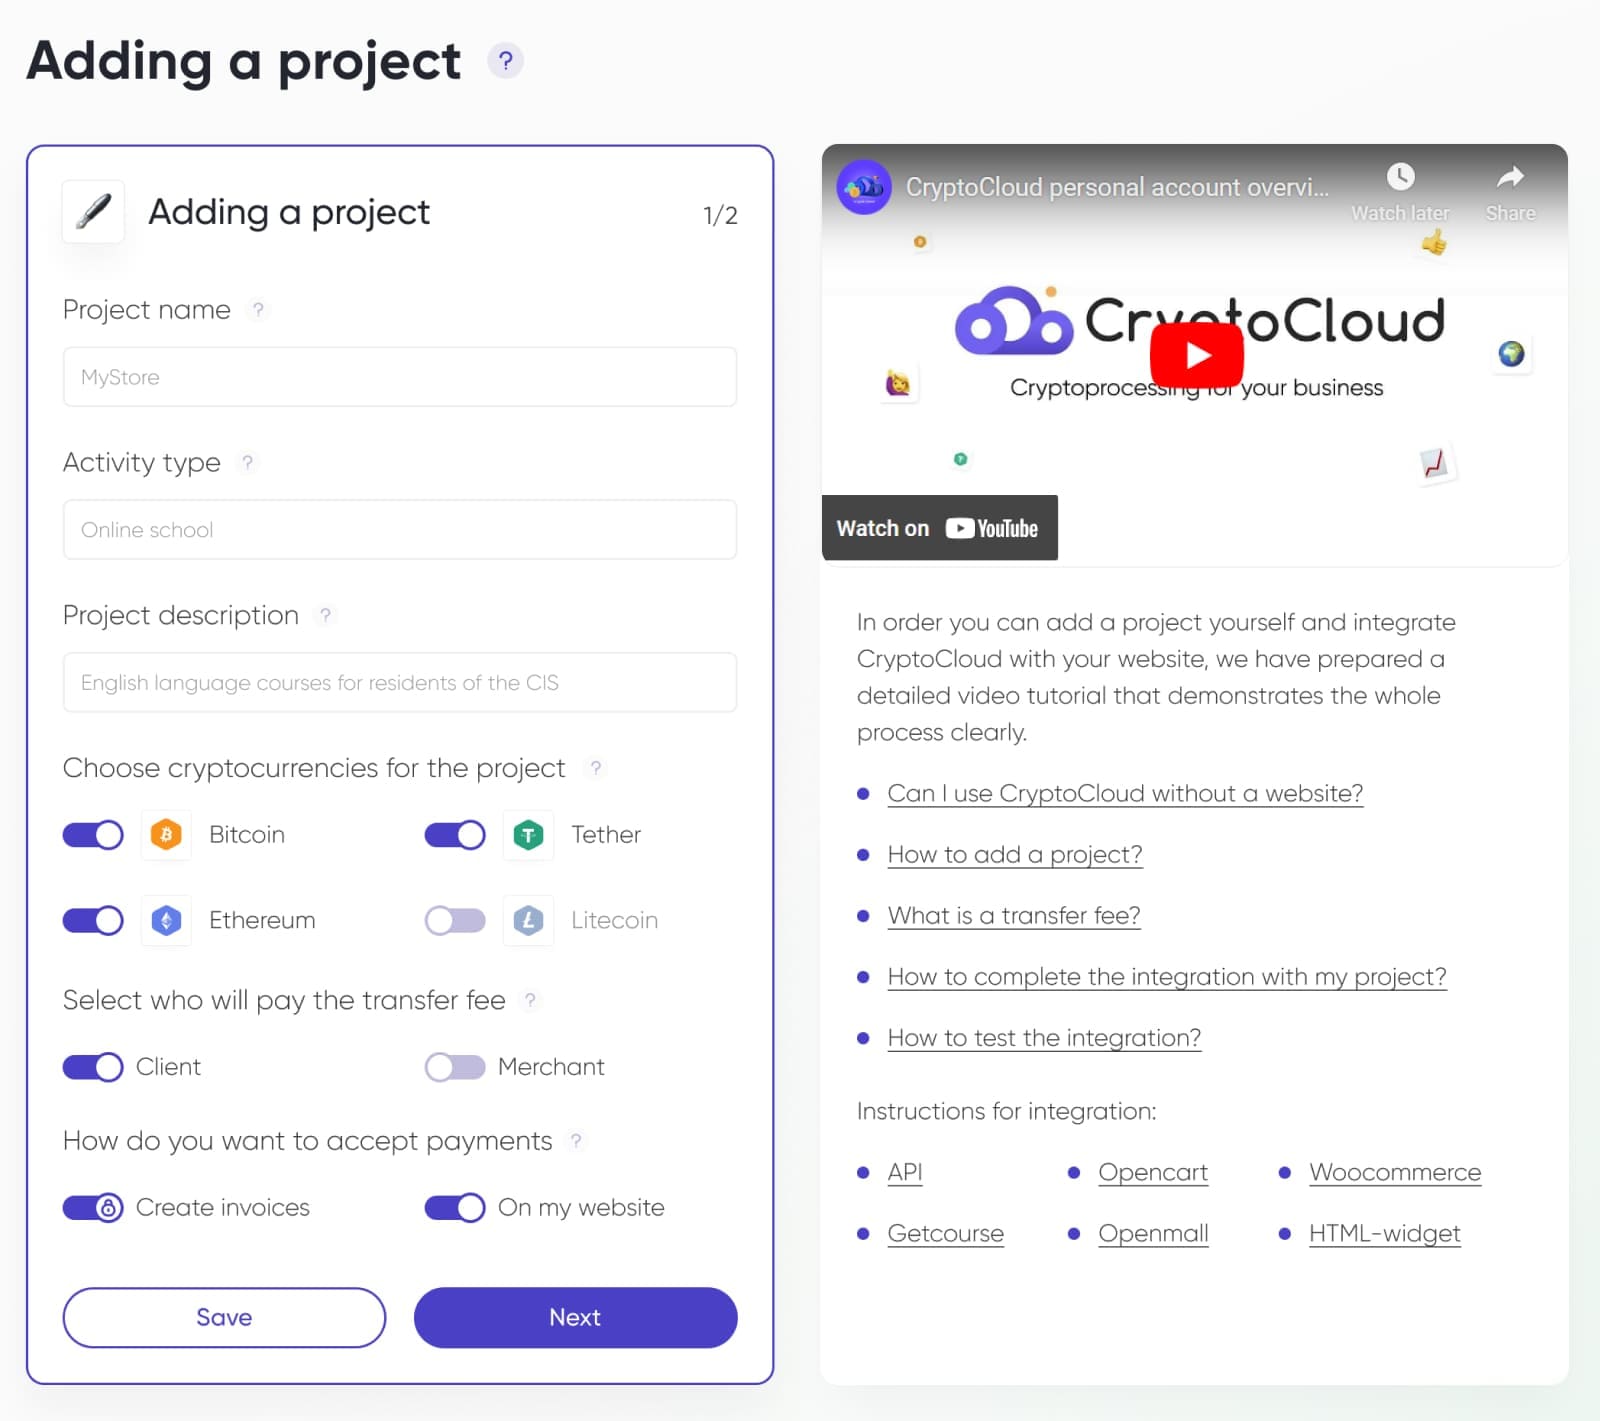 To add a project to the CryptoCloud service, fill in the required fields in your personal account. 